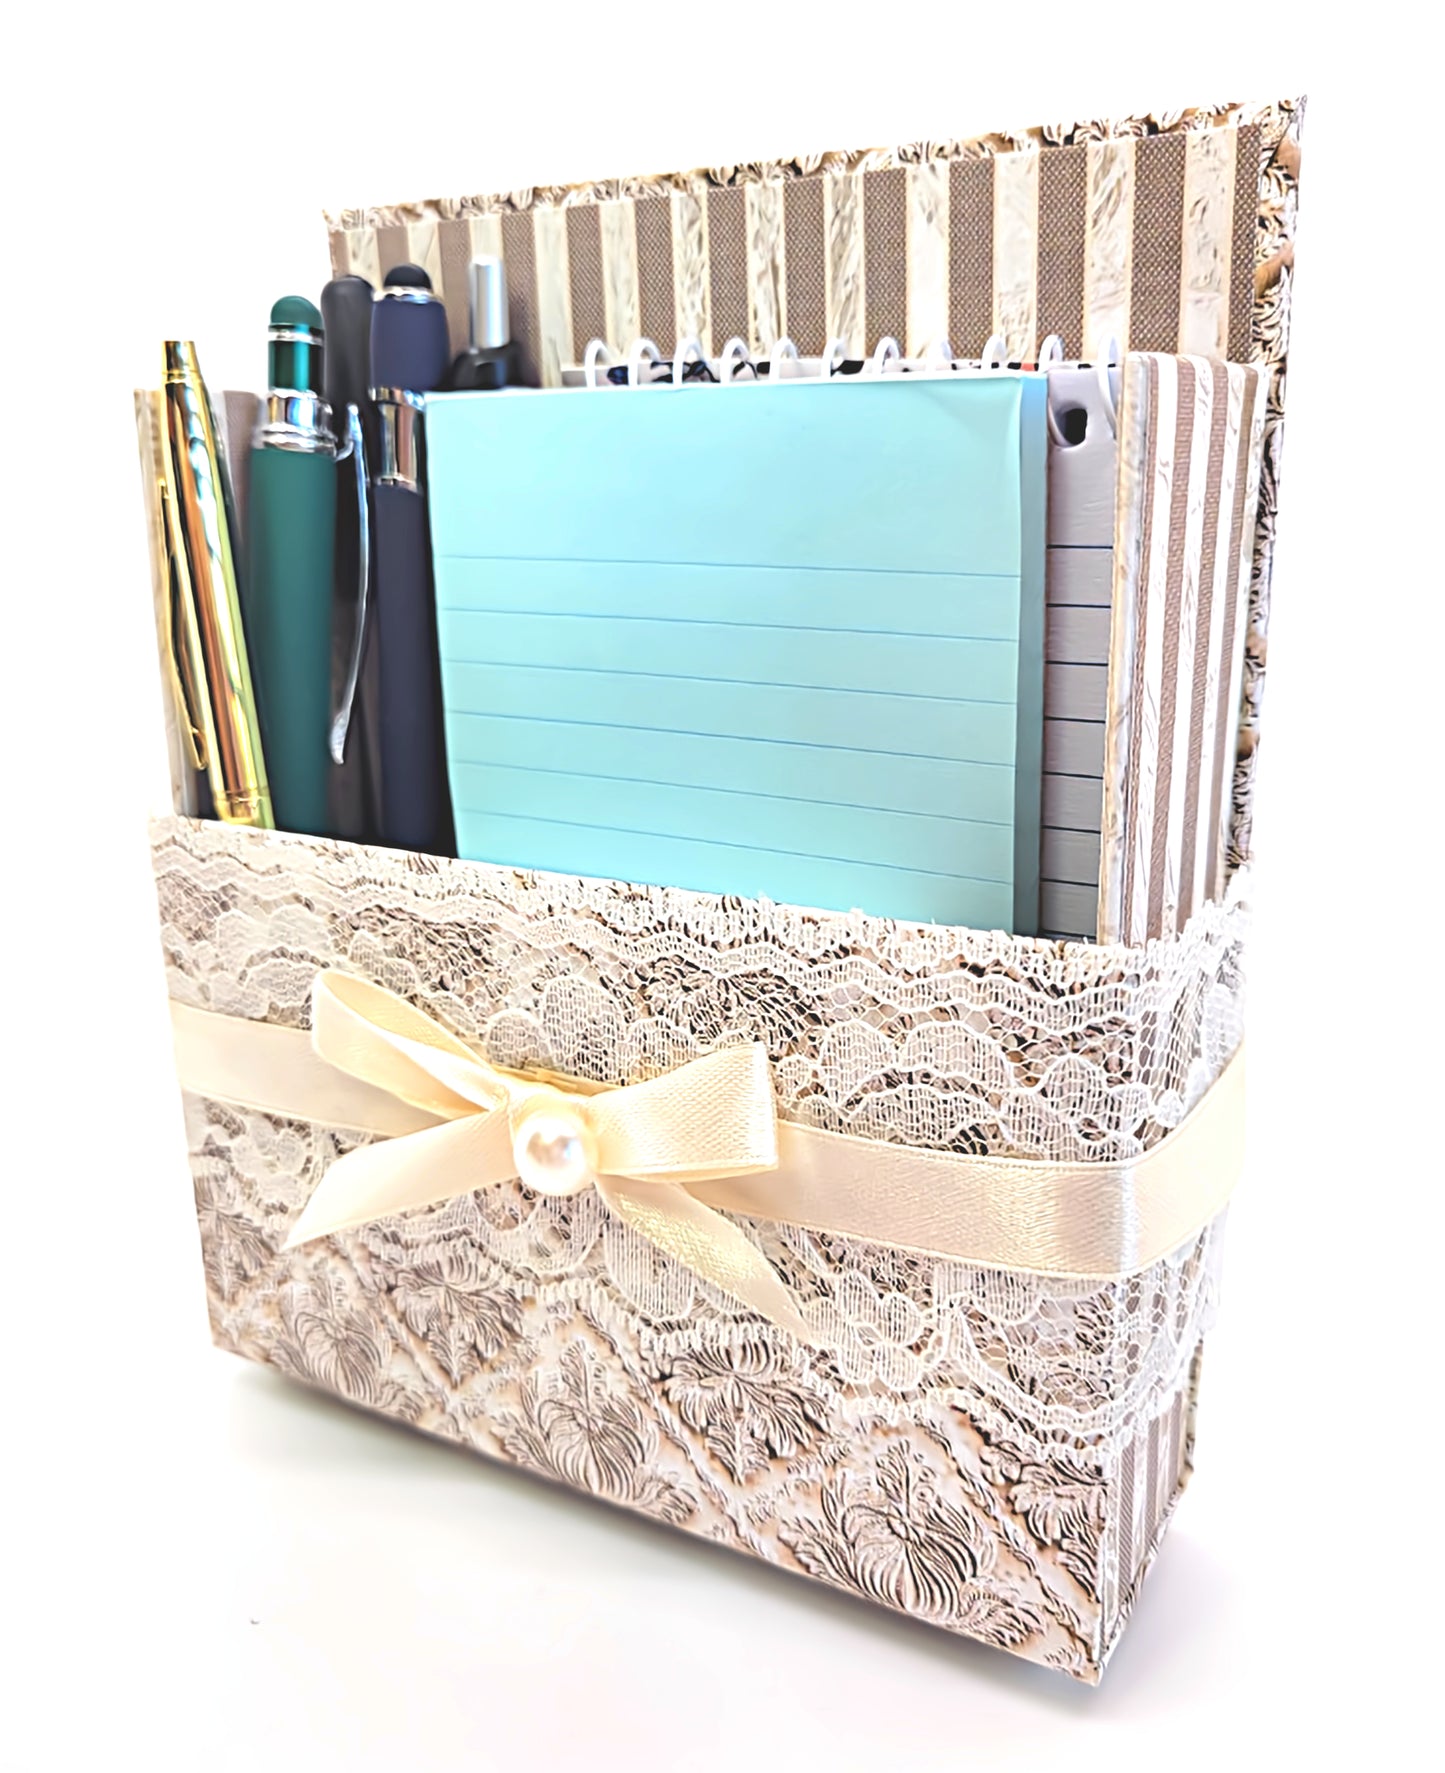 42-Pc Stationery Gift Box Set w/Reusable Desktop Organizer Box and Gold Pen - Vintage Letters & Ivory Lace) - Chic Brico